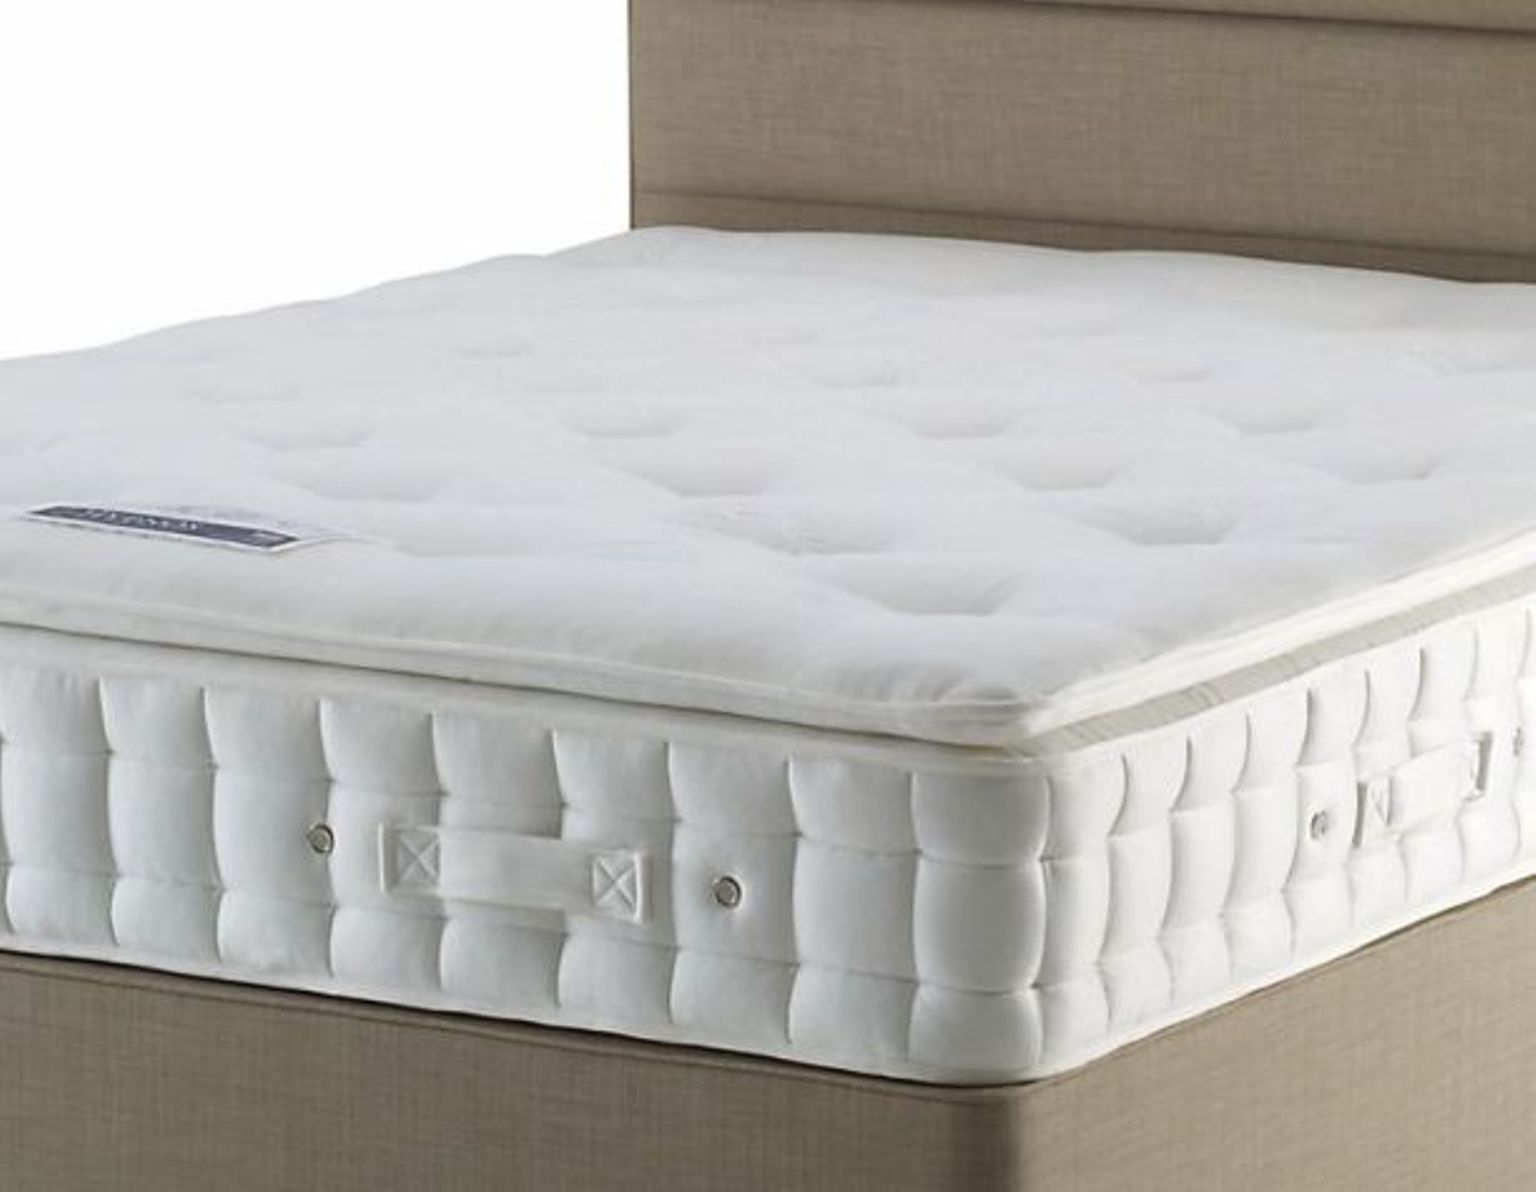 foam mattress with hard and softer side